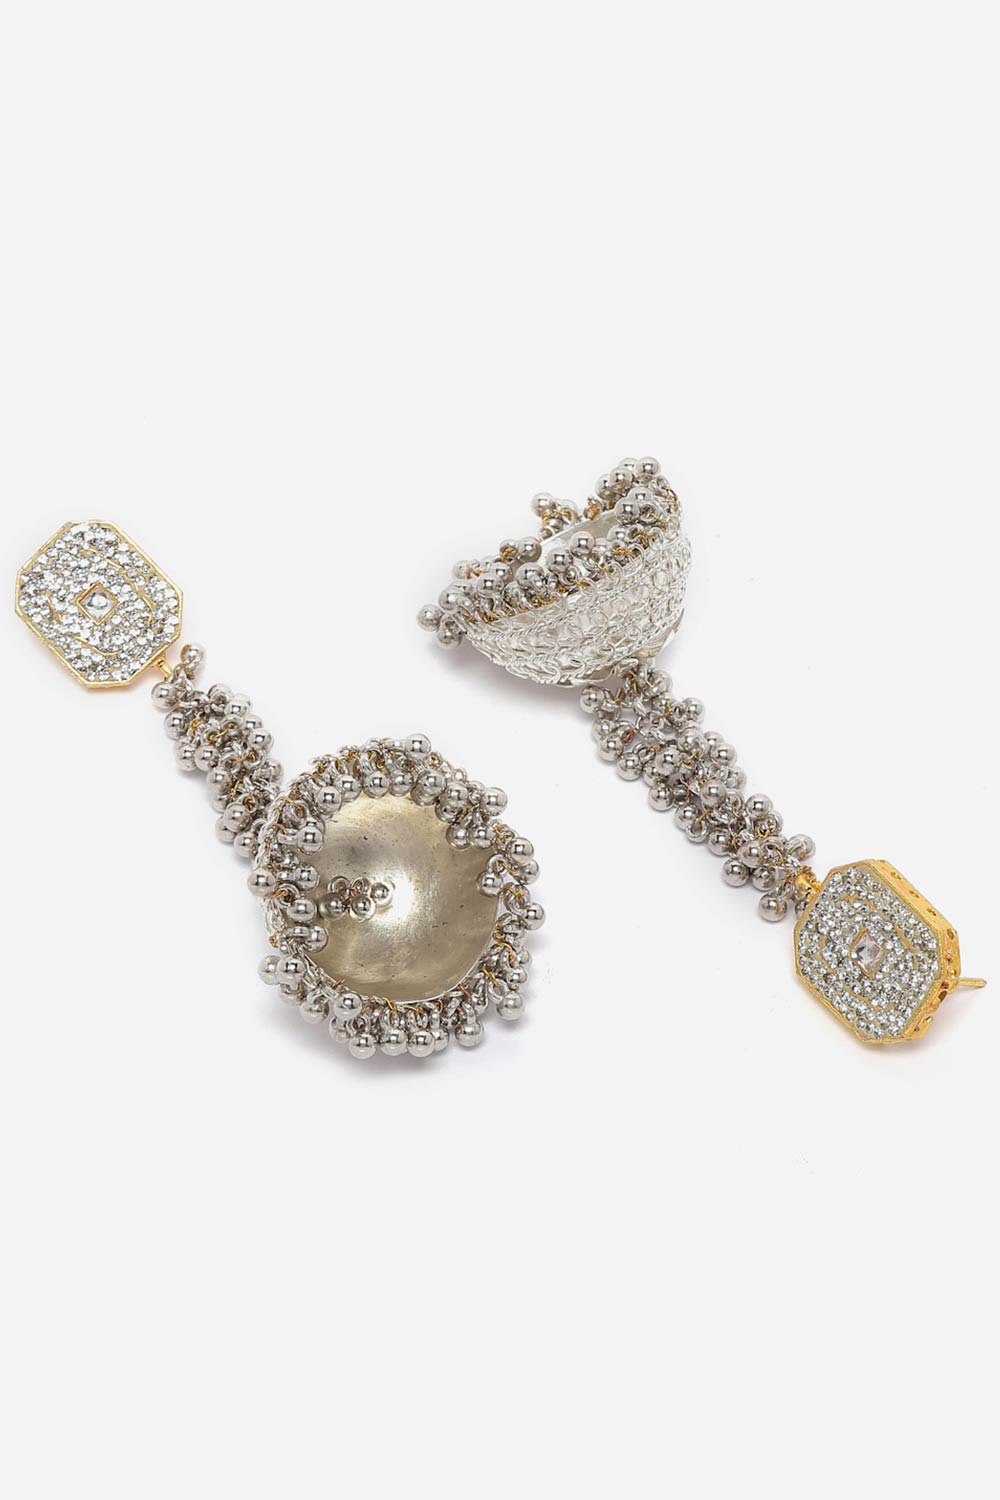 Buy Alyona Silver & Gold American Diamonds with Pearls Jhumka Earrings Online - Back